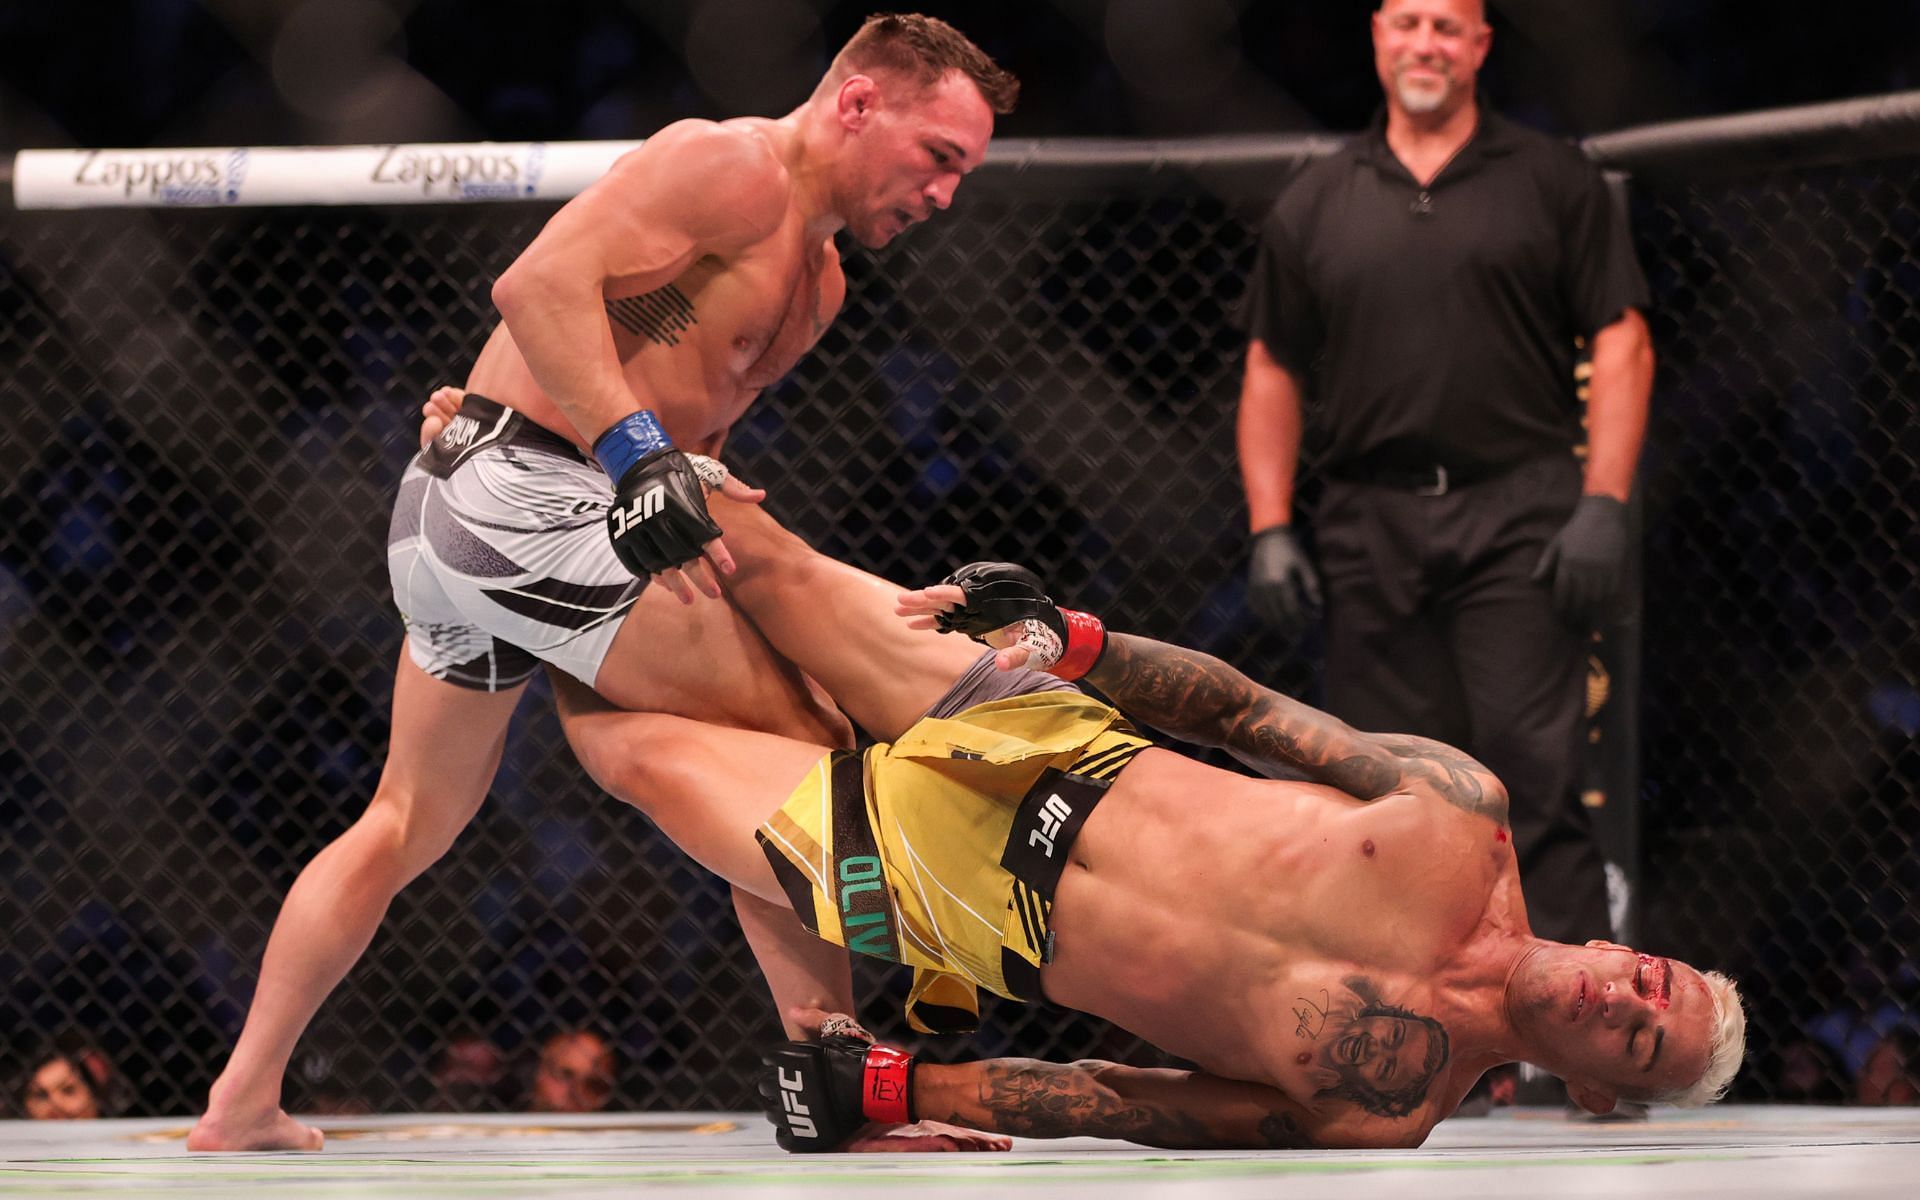 Michael Chandler (left) seemingly came close to knocking Charles Oliveira (right) out in their UFC lightweight title showdown [Image courtesy: Getty Images]